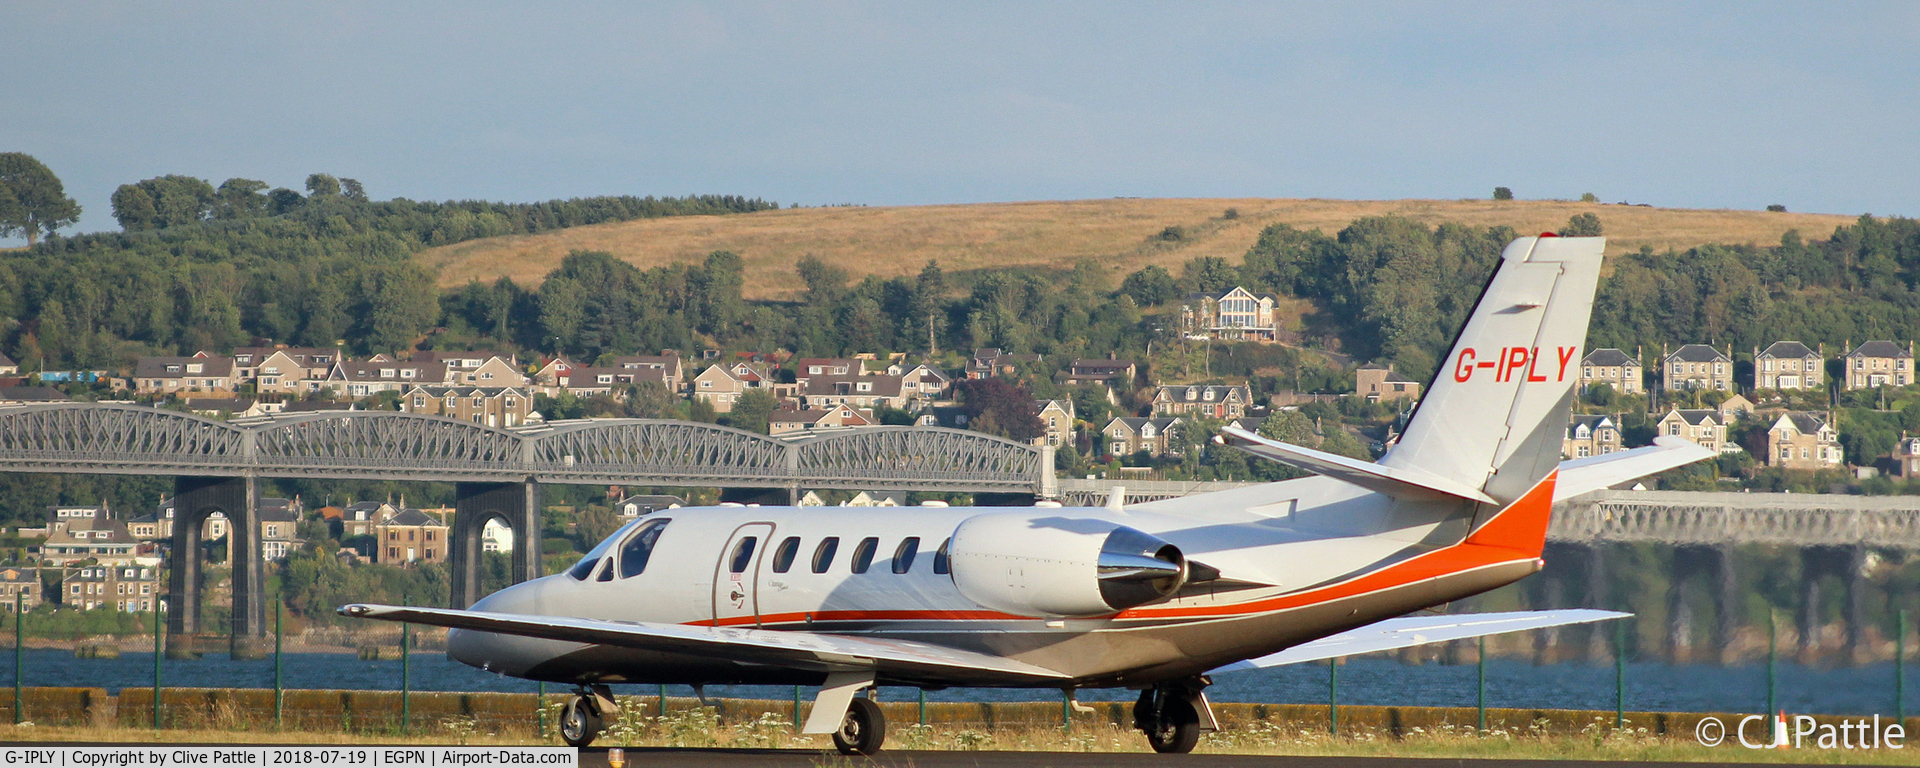 G-IPLY, 2000 Cessna 550 Citation Bravo C/N 550-0927, In action at Dundee